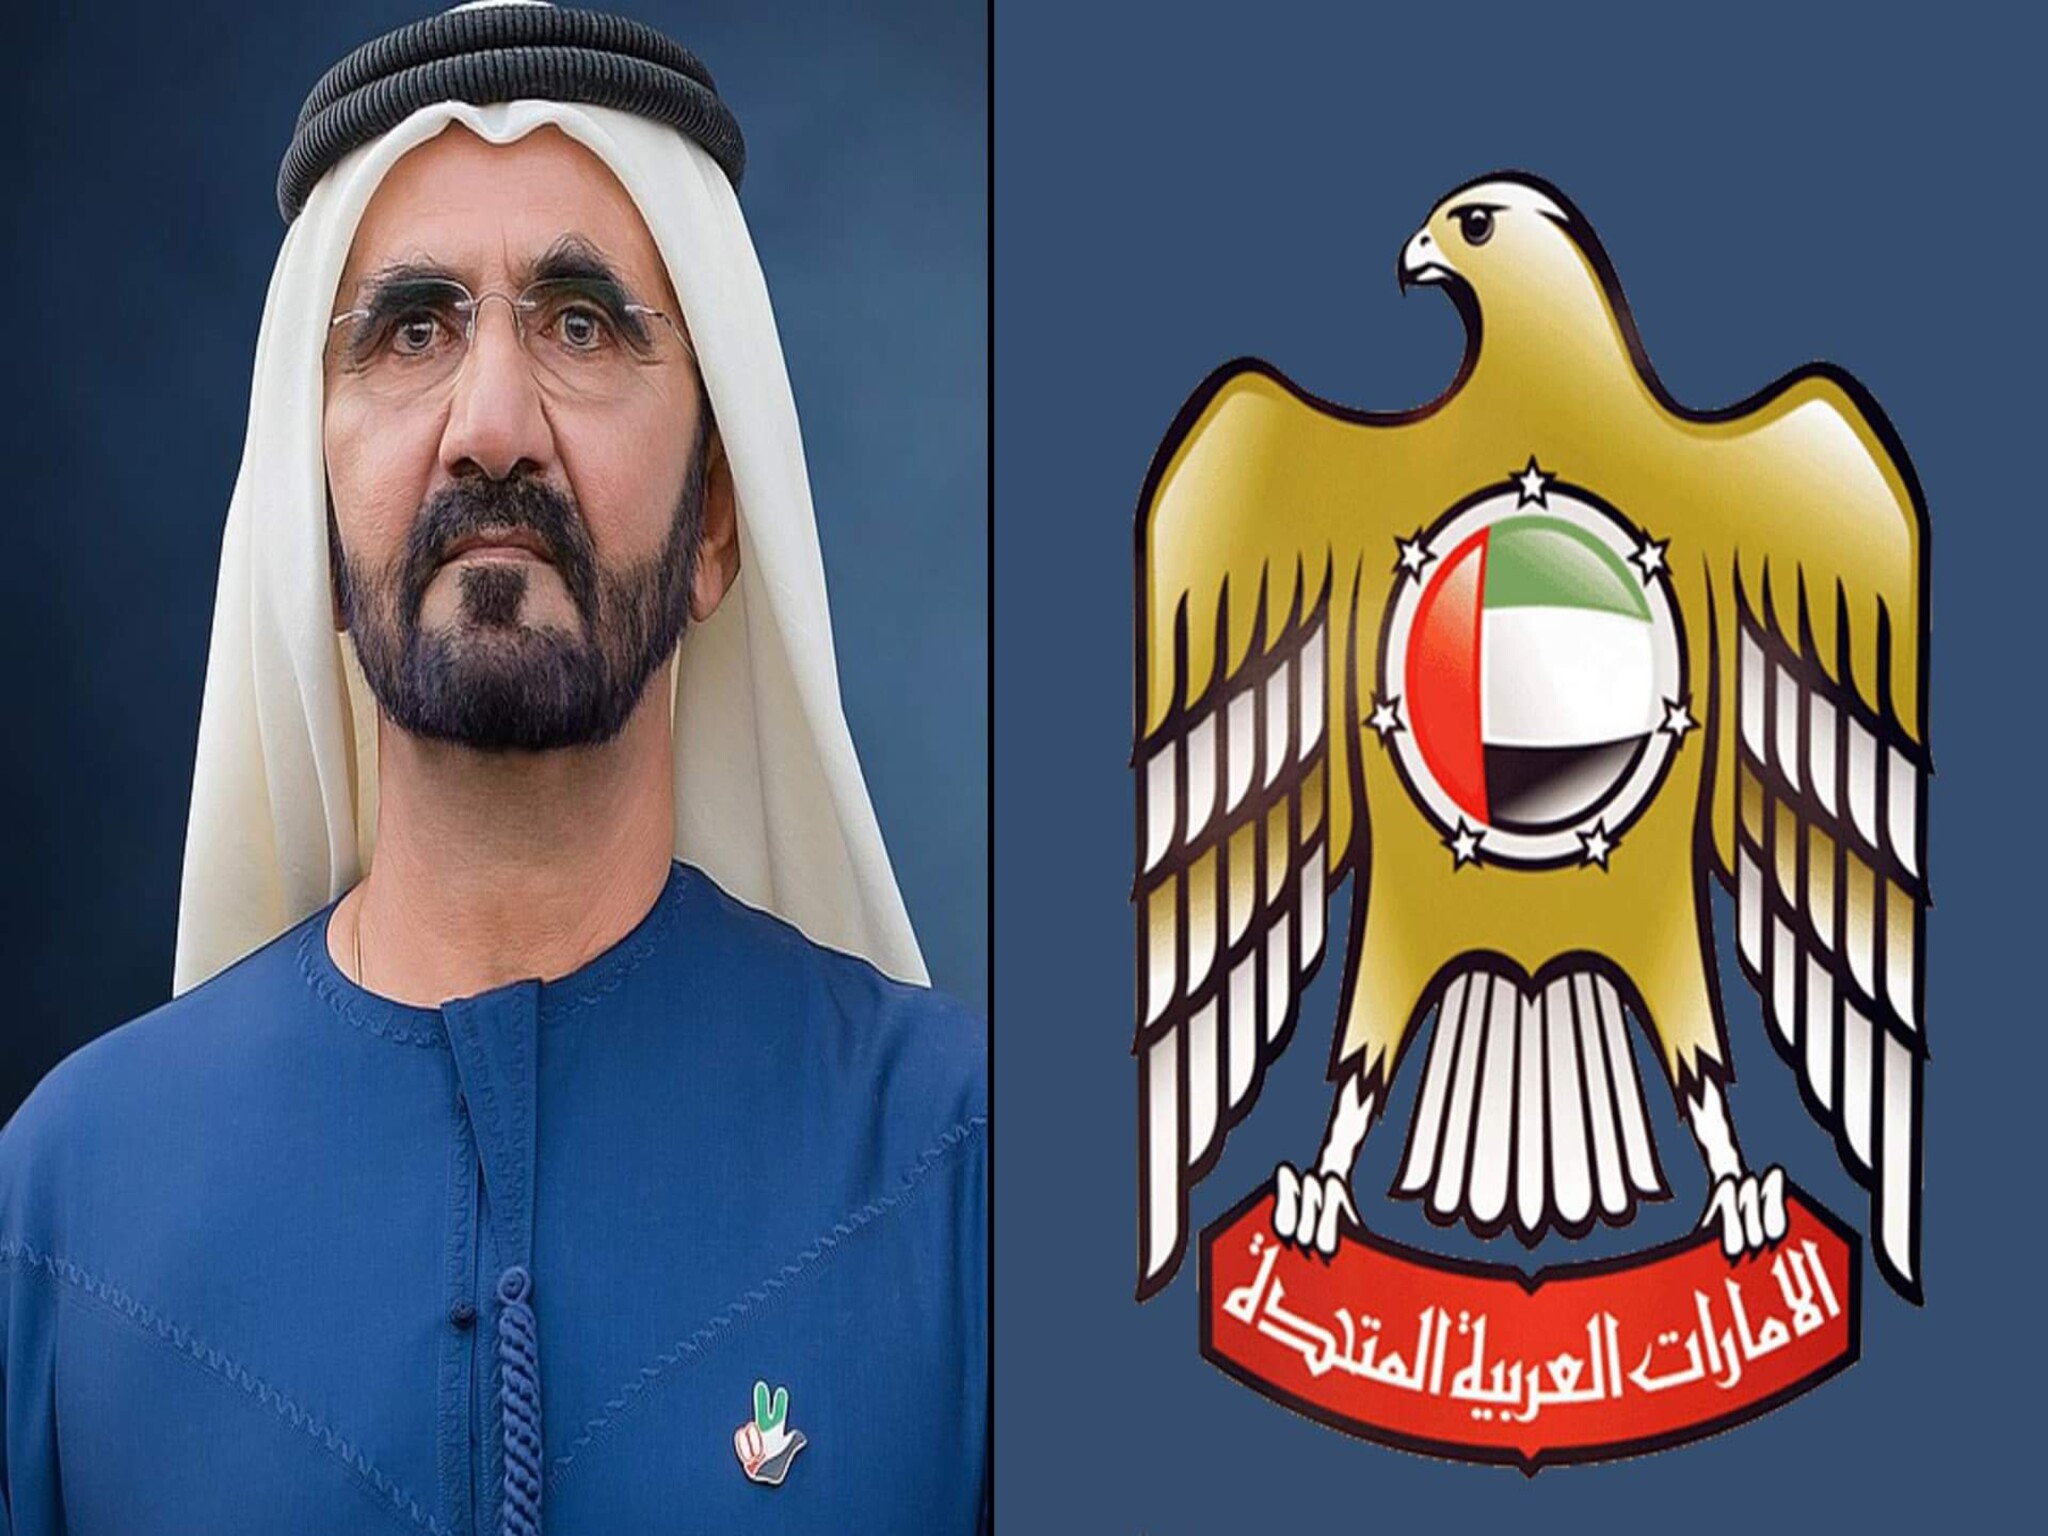 Statement by Sheikh Mohammed bin Rashid, “Prime Minister” to all citizens and residents